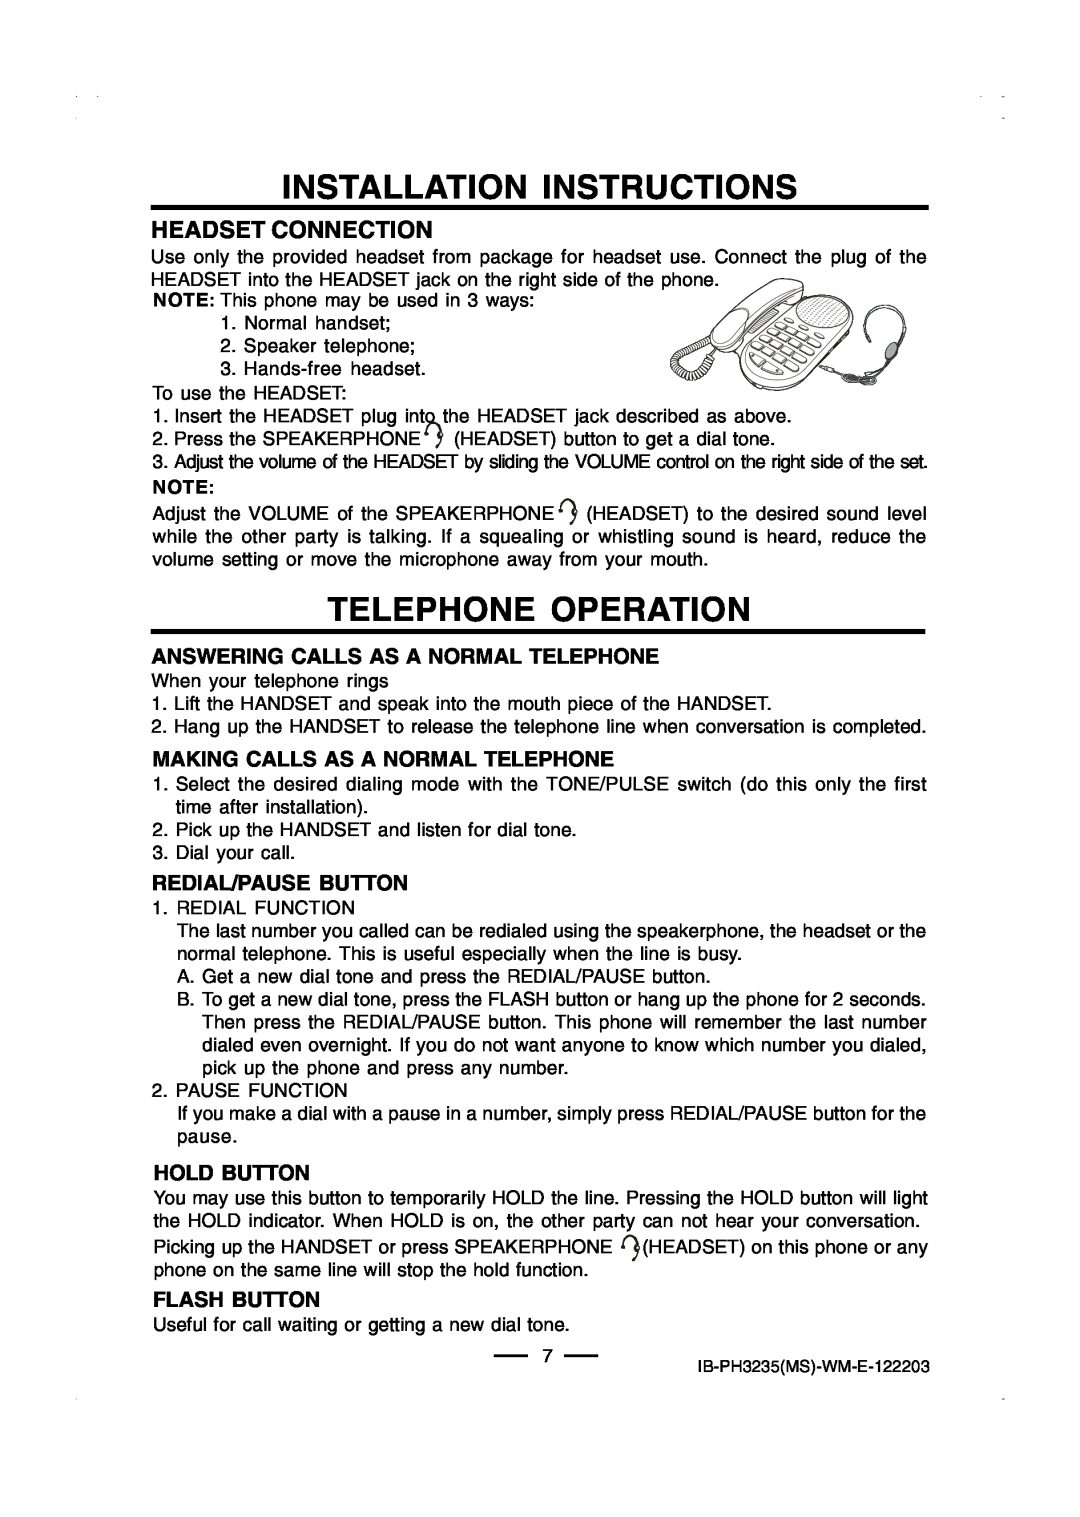 Lenoxx Electronics PH-3235 Telephone Operation, Headset Connection, Installation Instructions, Redial/Pause Button 